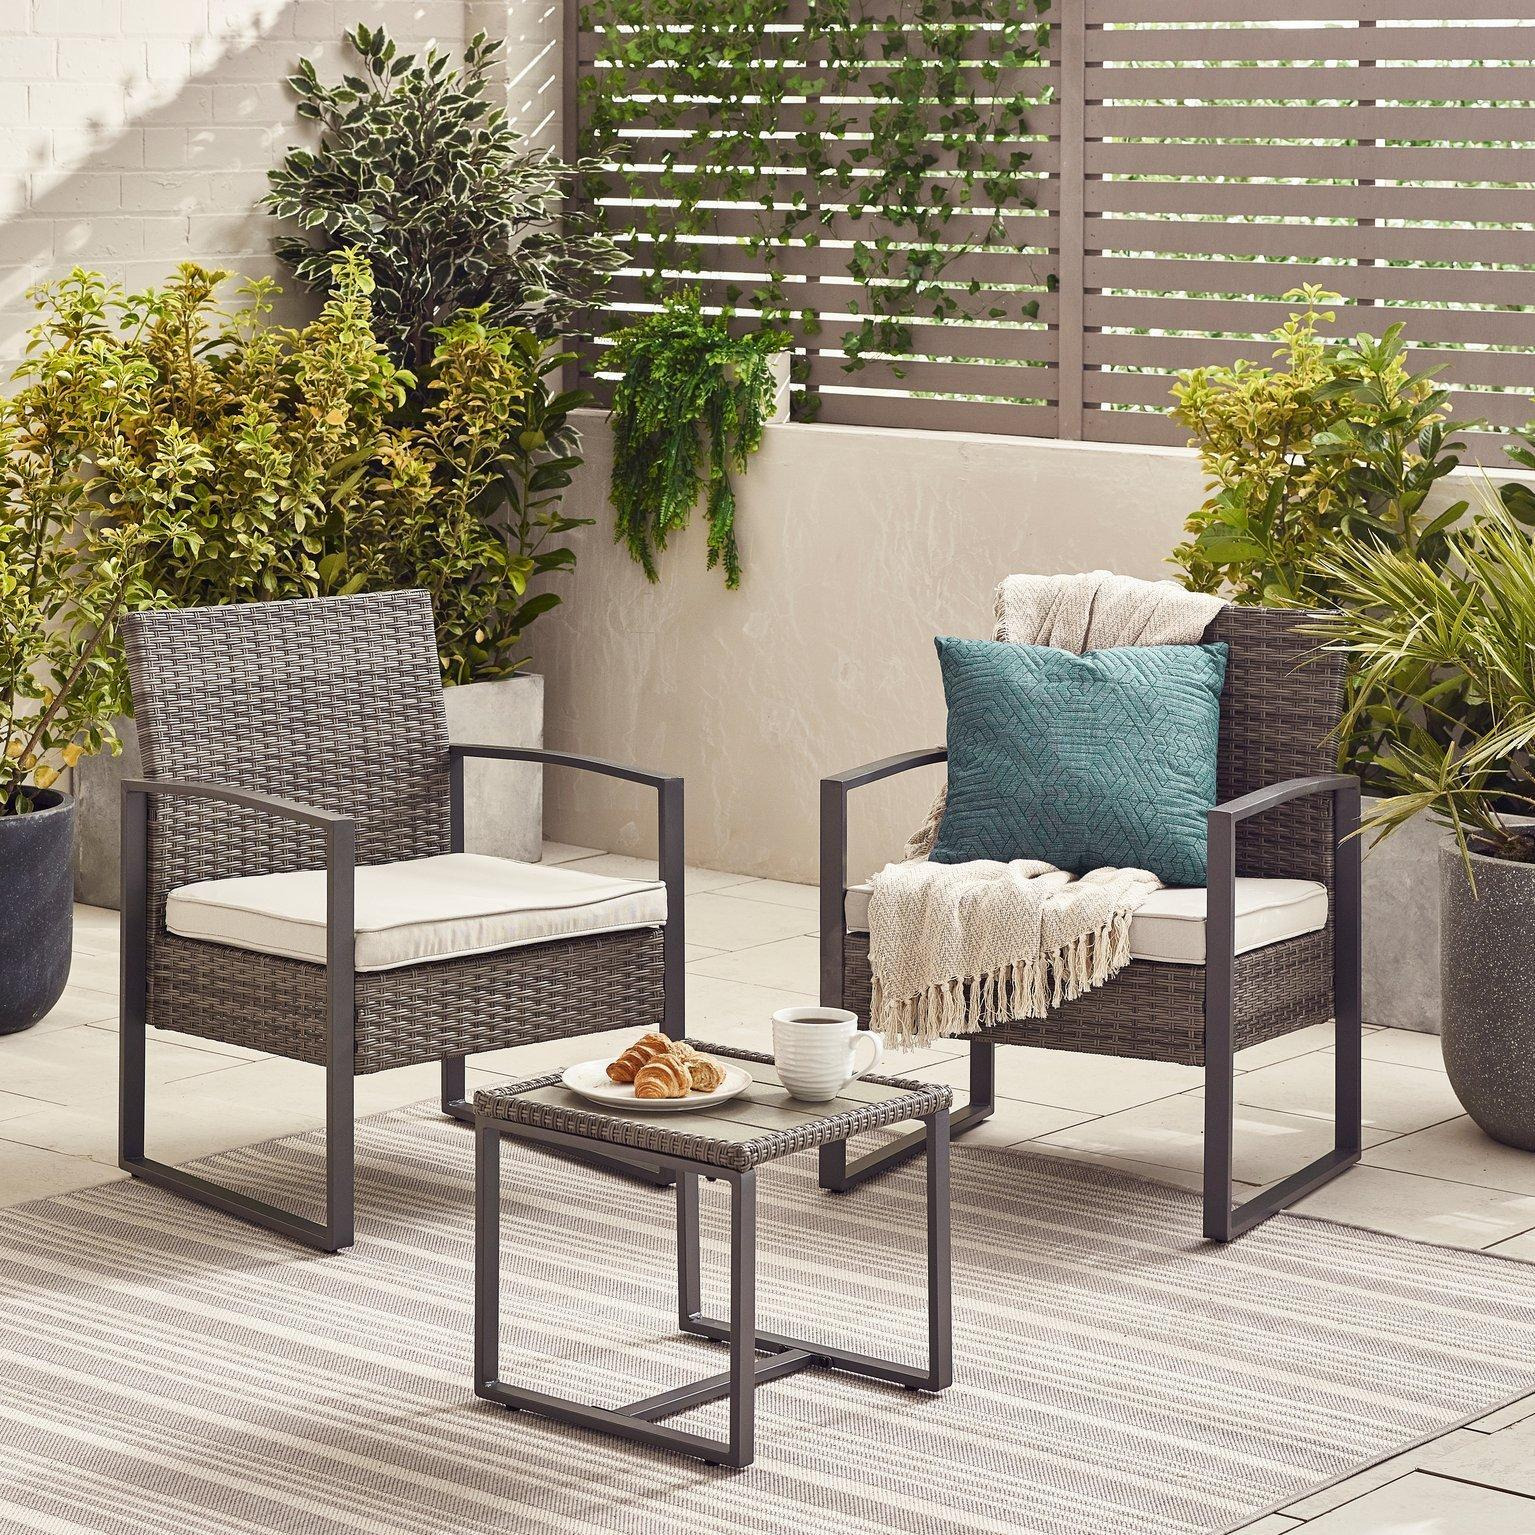 Algarve Grey PE Rattan 2 Seat Outdoor Garden Bistro Set, 2 Chairs, Square Coffee Table, Modern Industrial Style - image 1